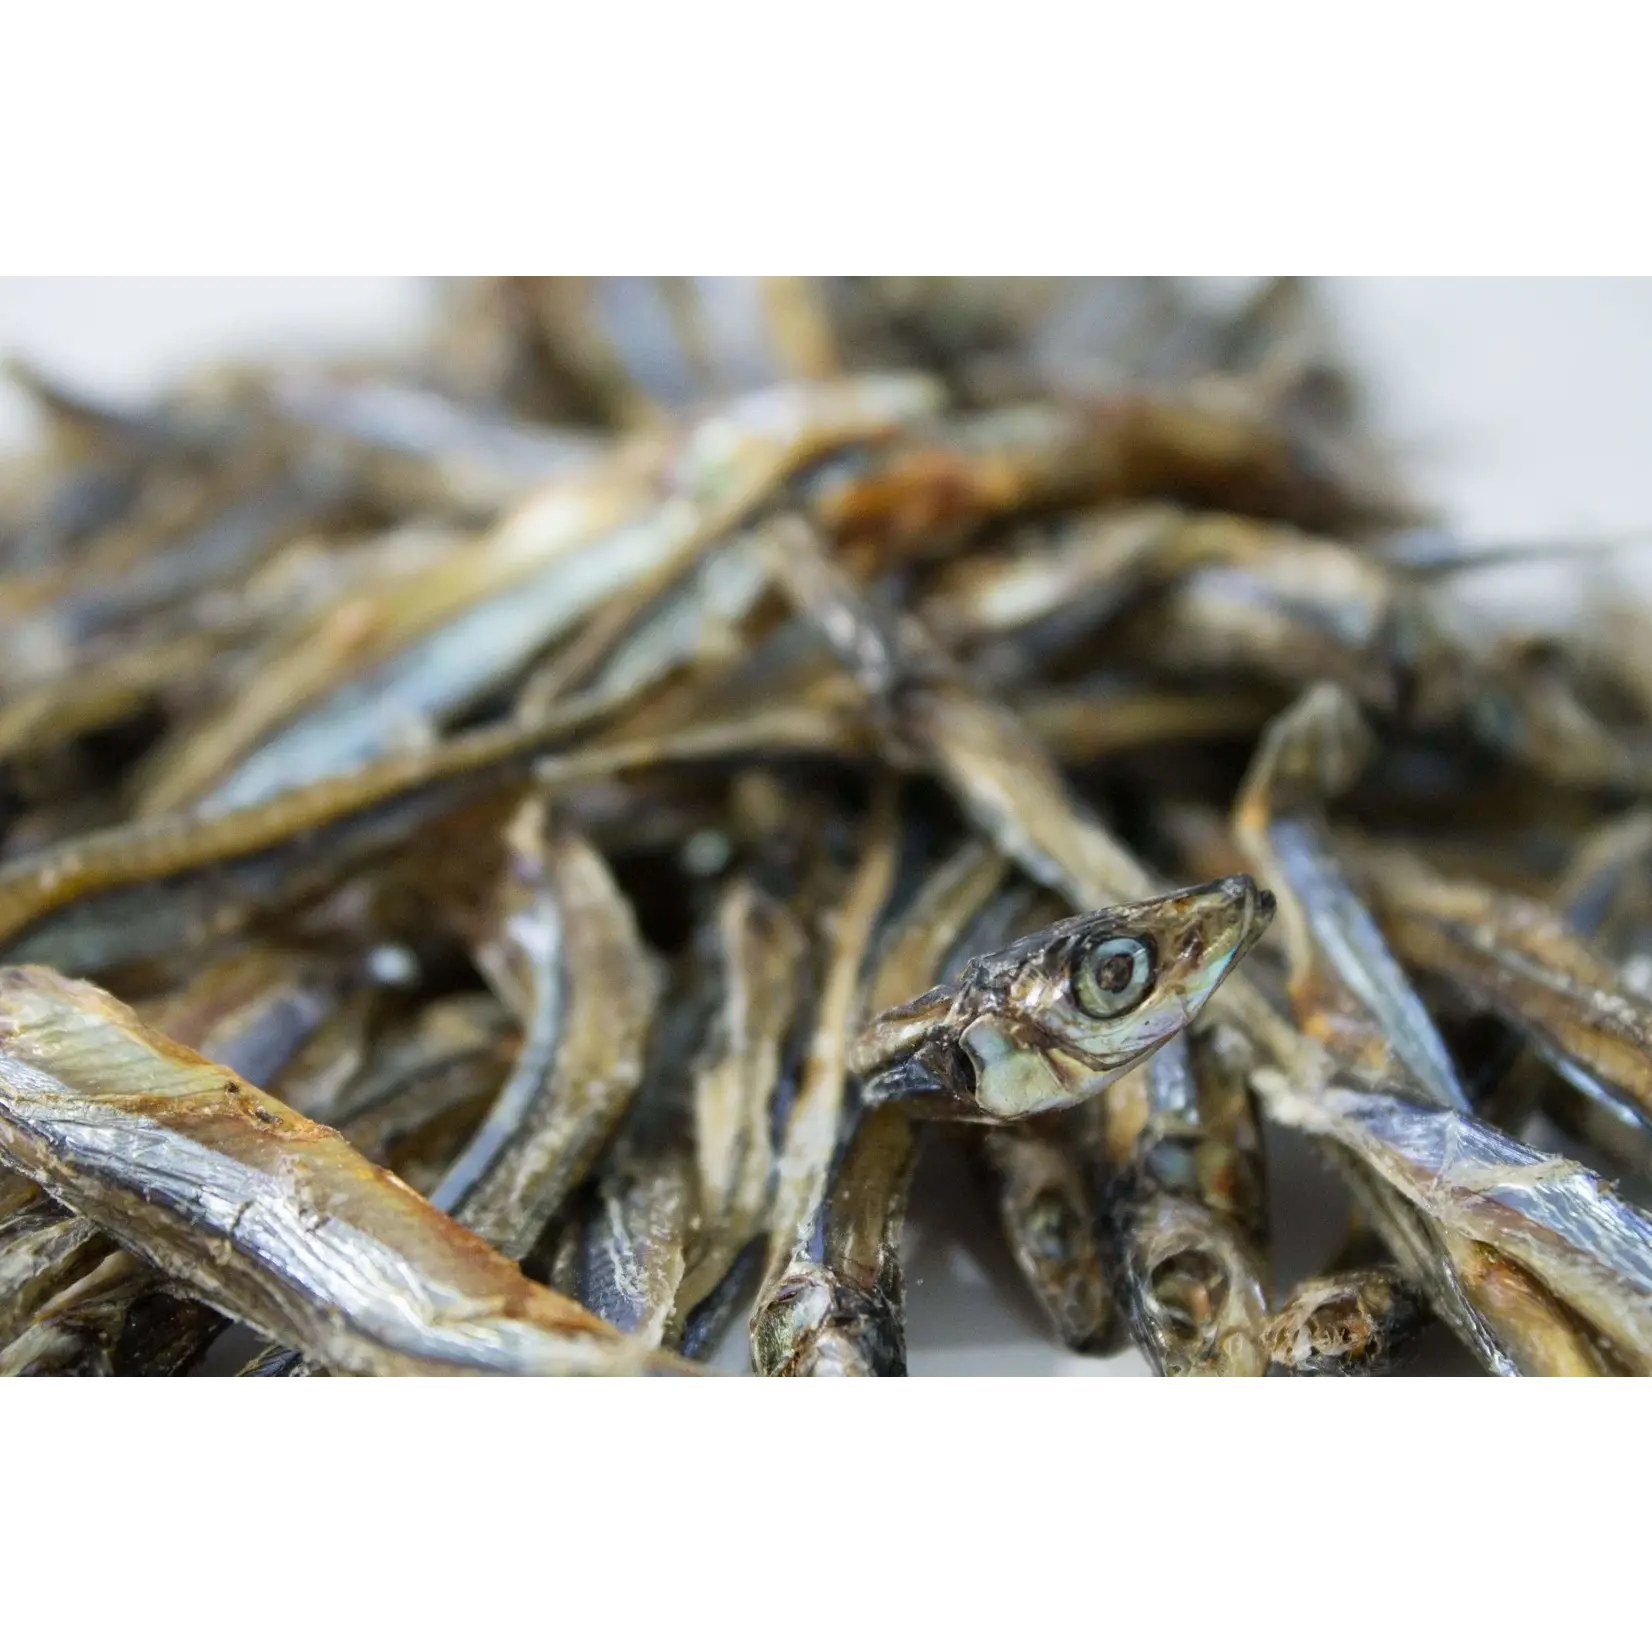 Only One Treats Only One Treats: Dried Sardines 90g